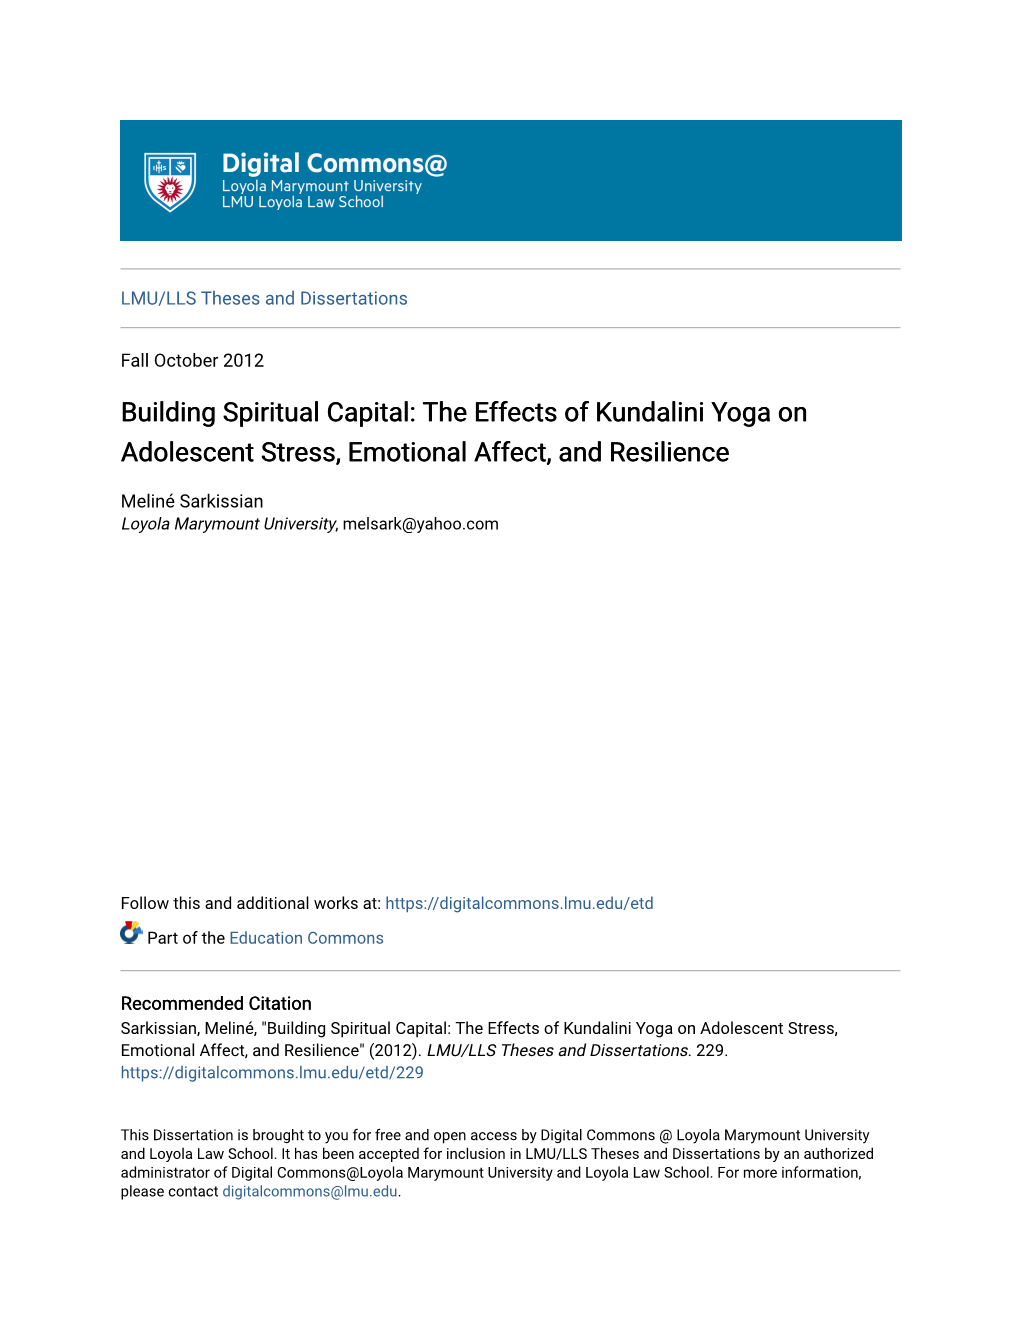 Building Spiritual Capital: the Effects of Kundalini Yoga on Adolescent Stress, Emotional Affect, and Resilience